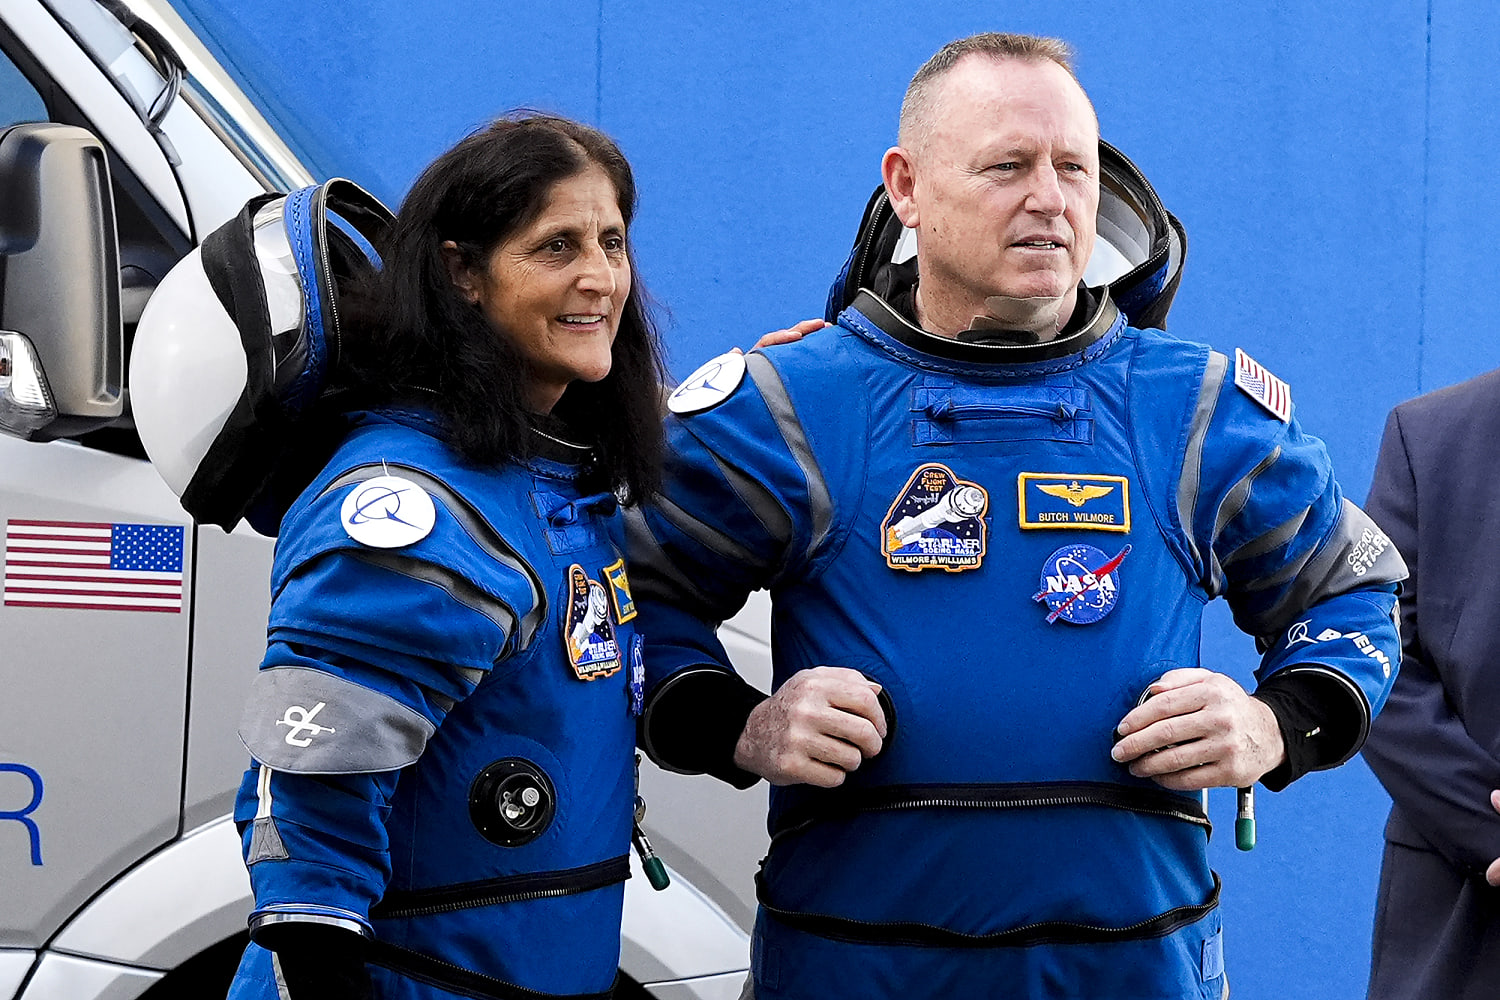 Boeing forced to call off its first launch with NASA astronauts once again